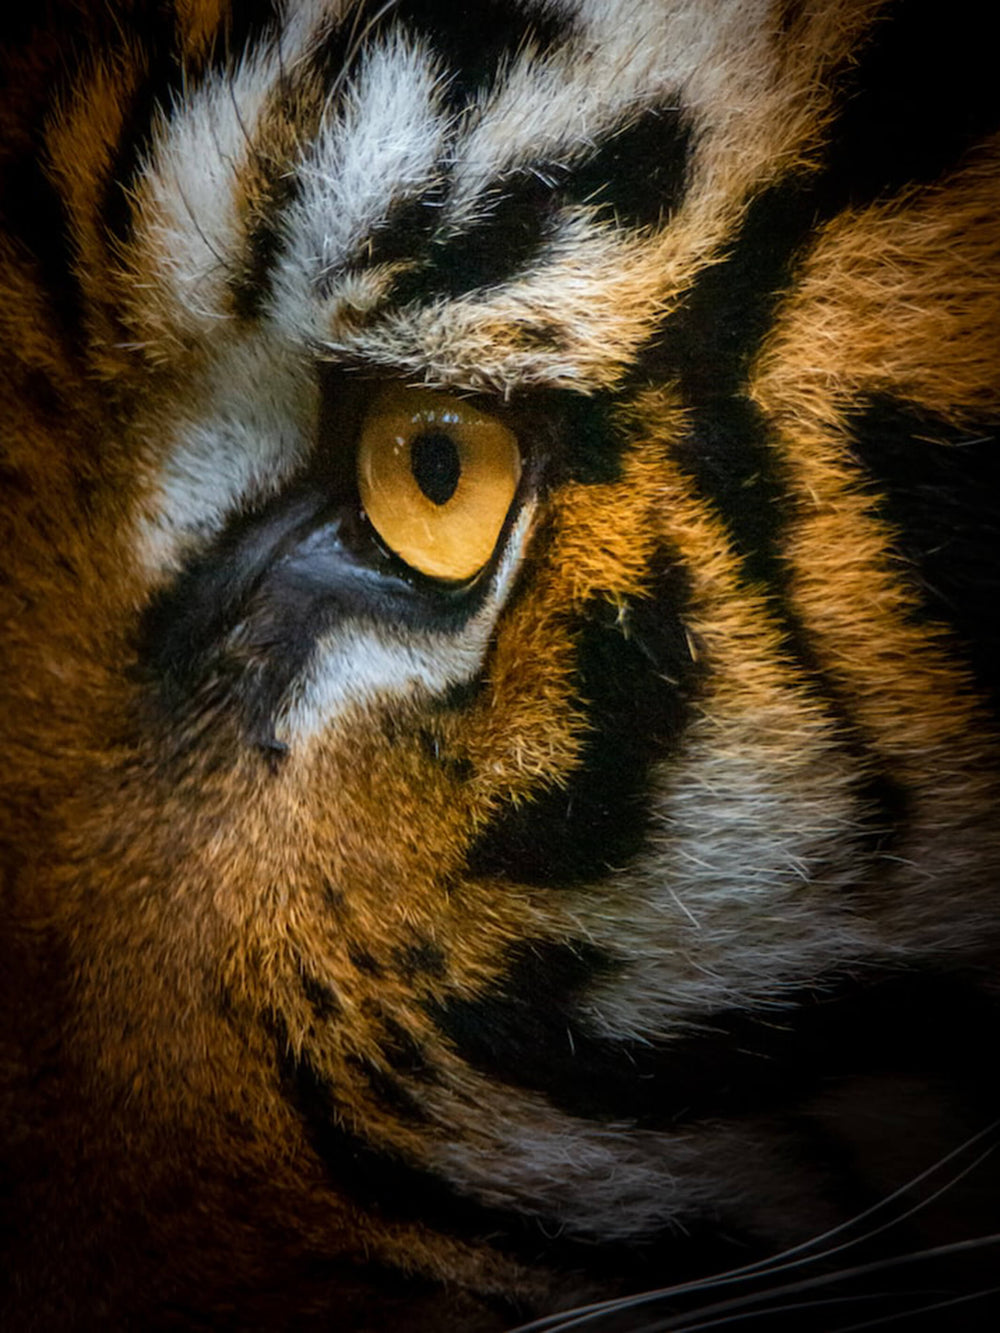 This is a close-up photo of a tiger's eye, facial patterns and colors that inspired the Eye of the Tiger Bracelet.  